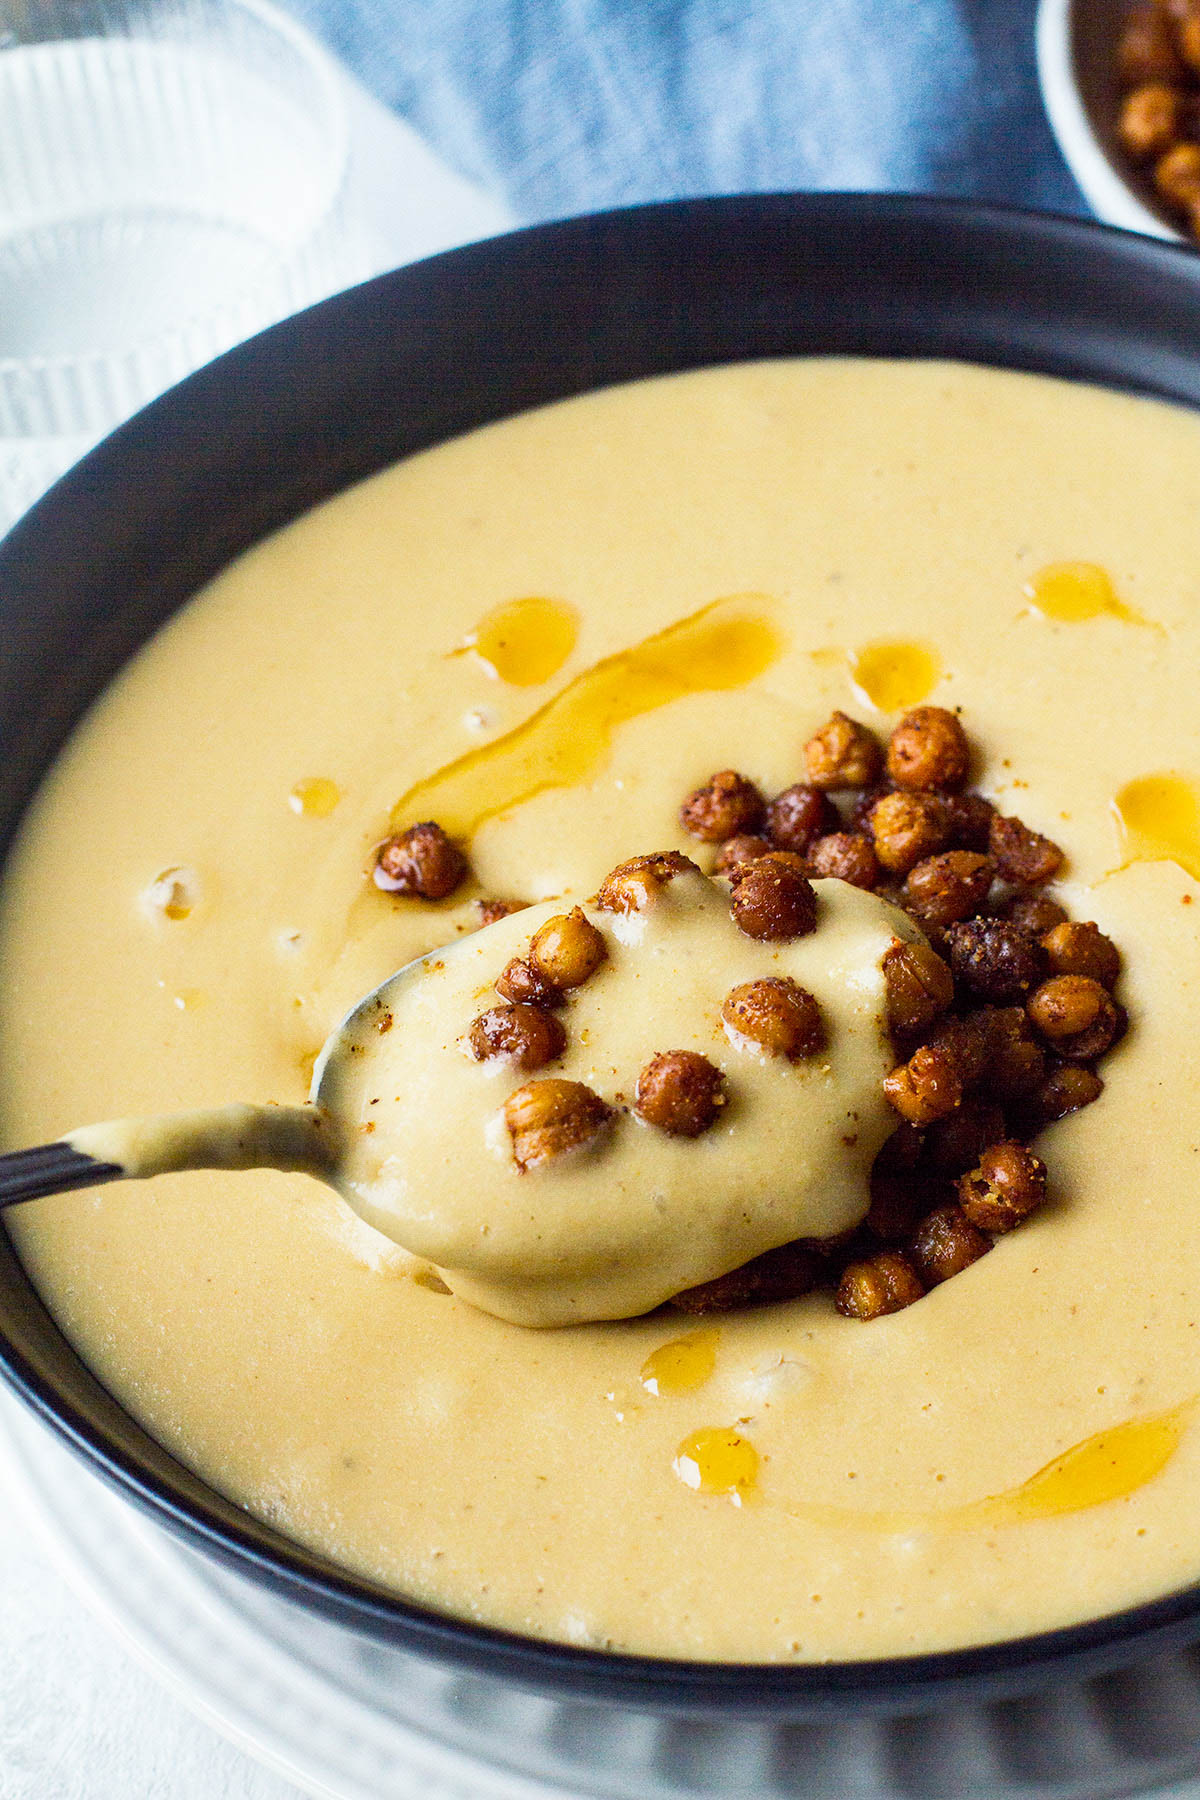 A spoonful of chickpea soup and roasted chickpeas.